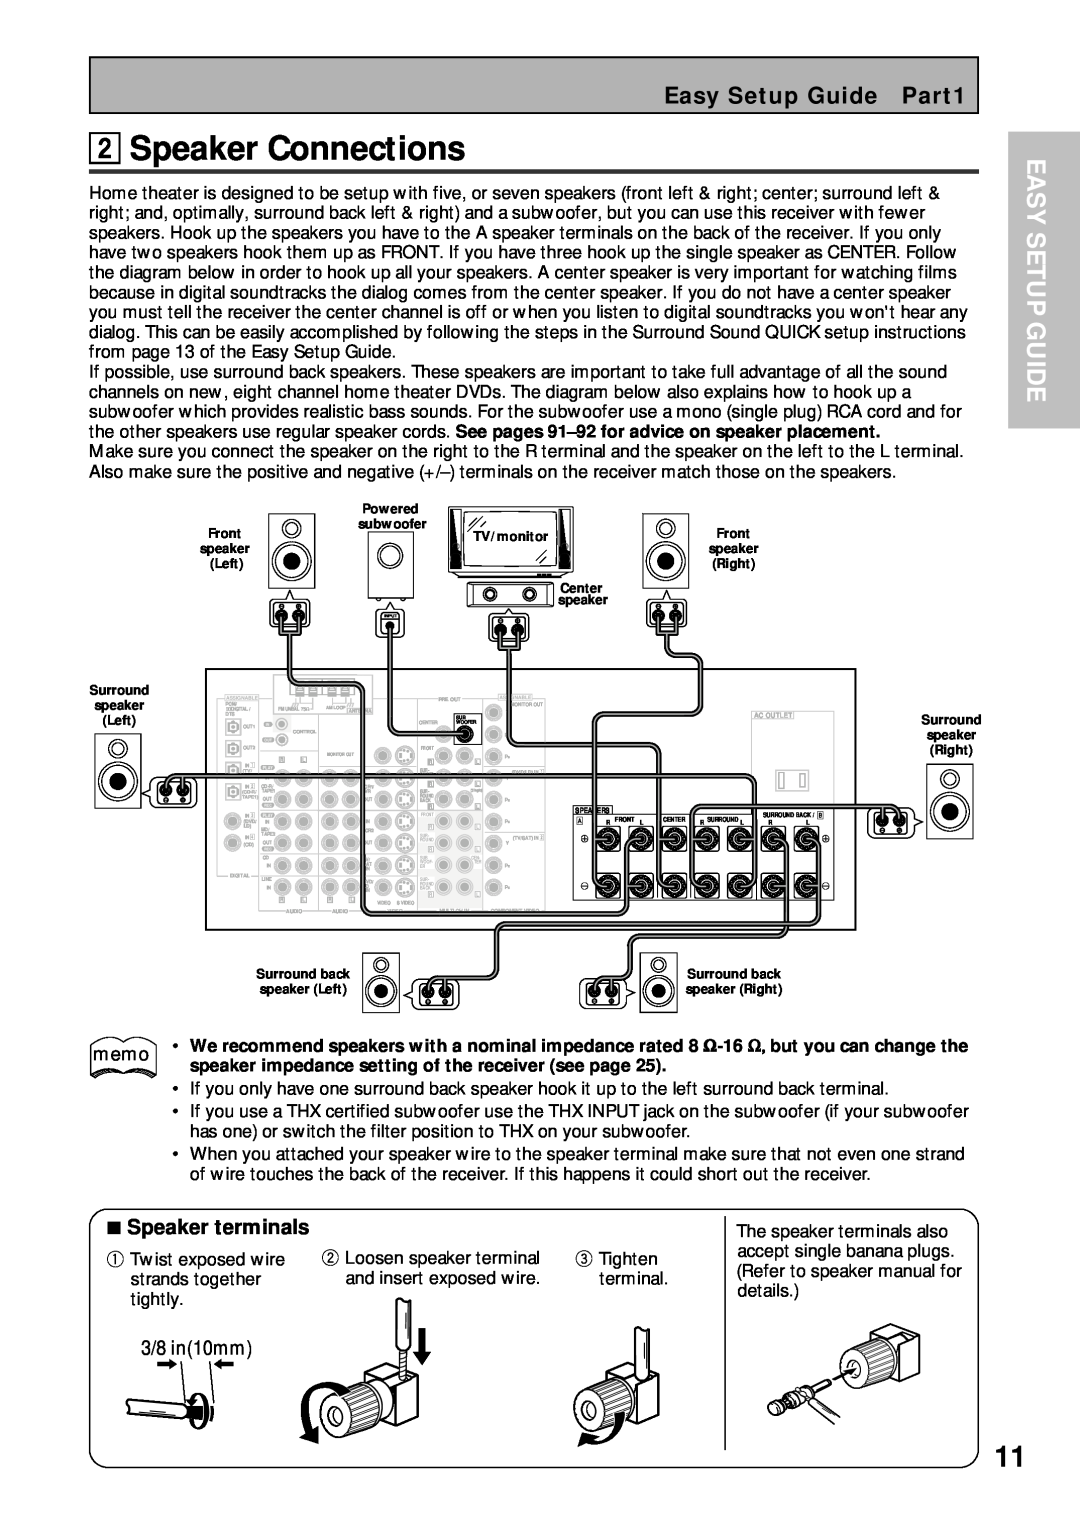 Pioneer VSX-43TX operating instructions 2Speaker Connections, 3/8 in10mm, Easy Setup Guide Part1, memo 